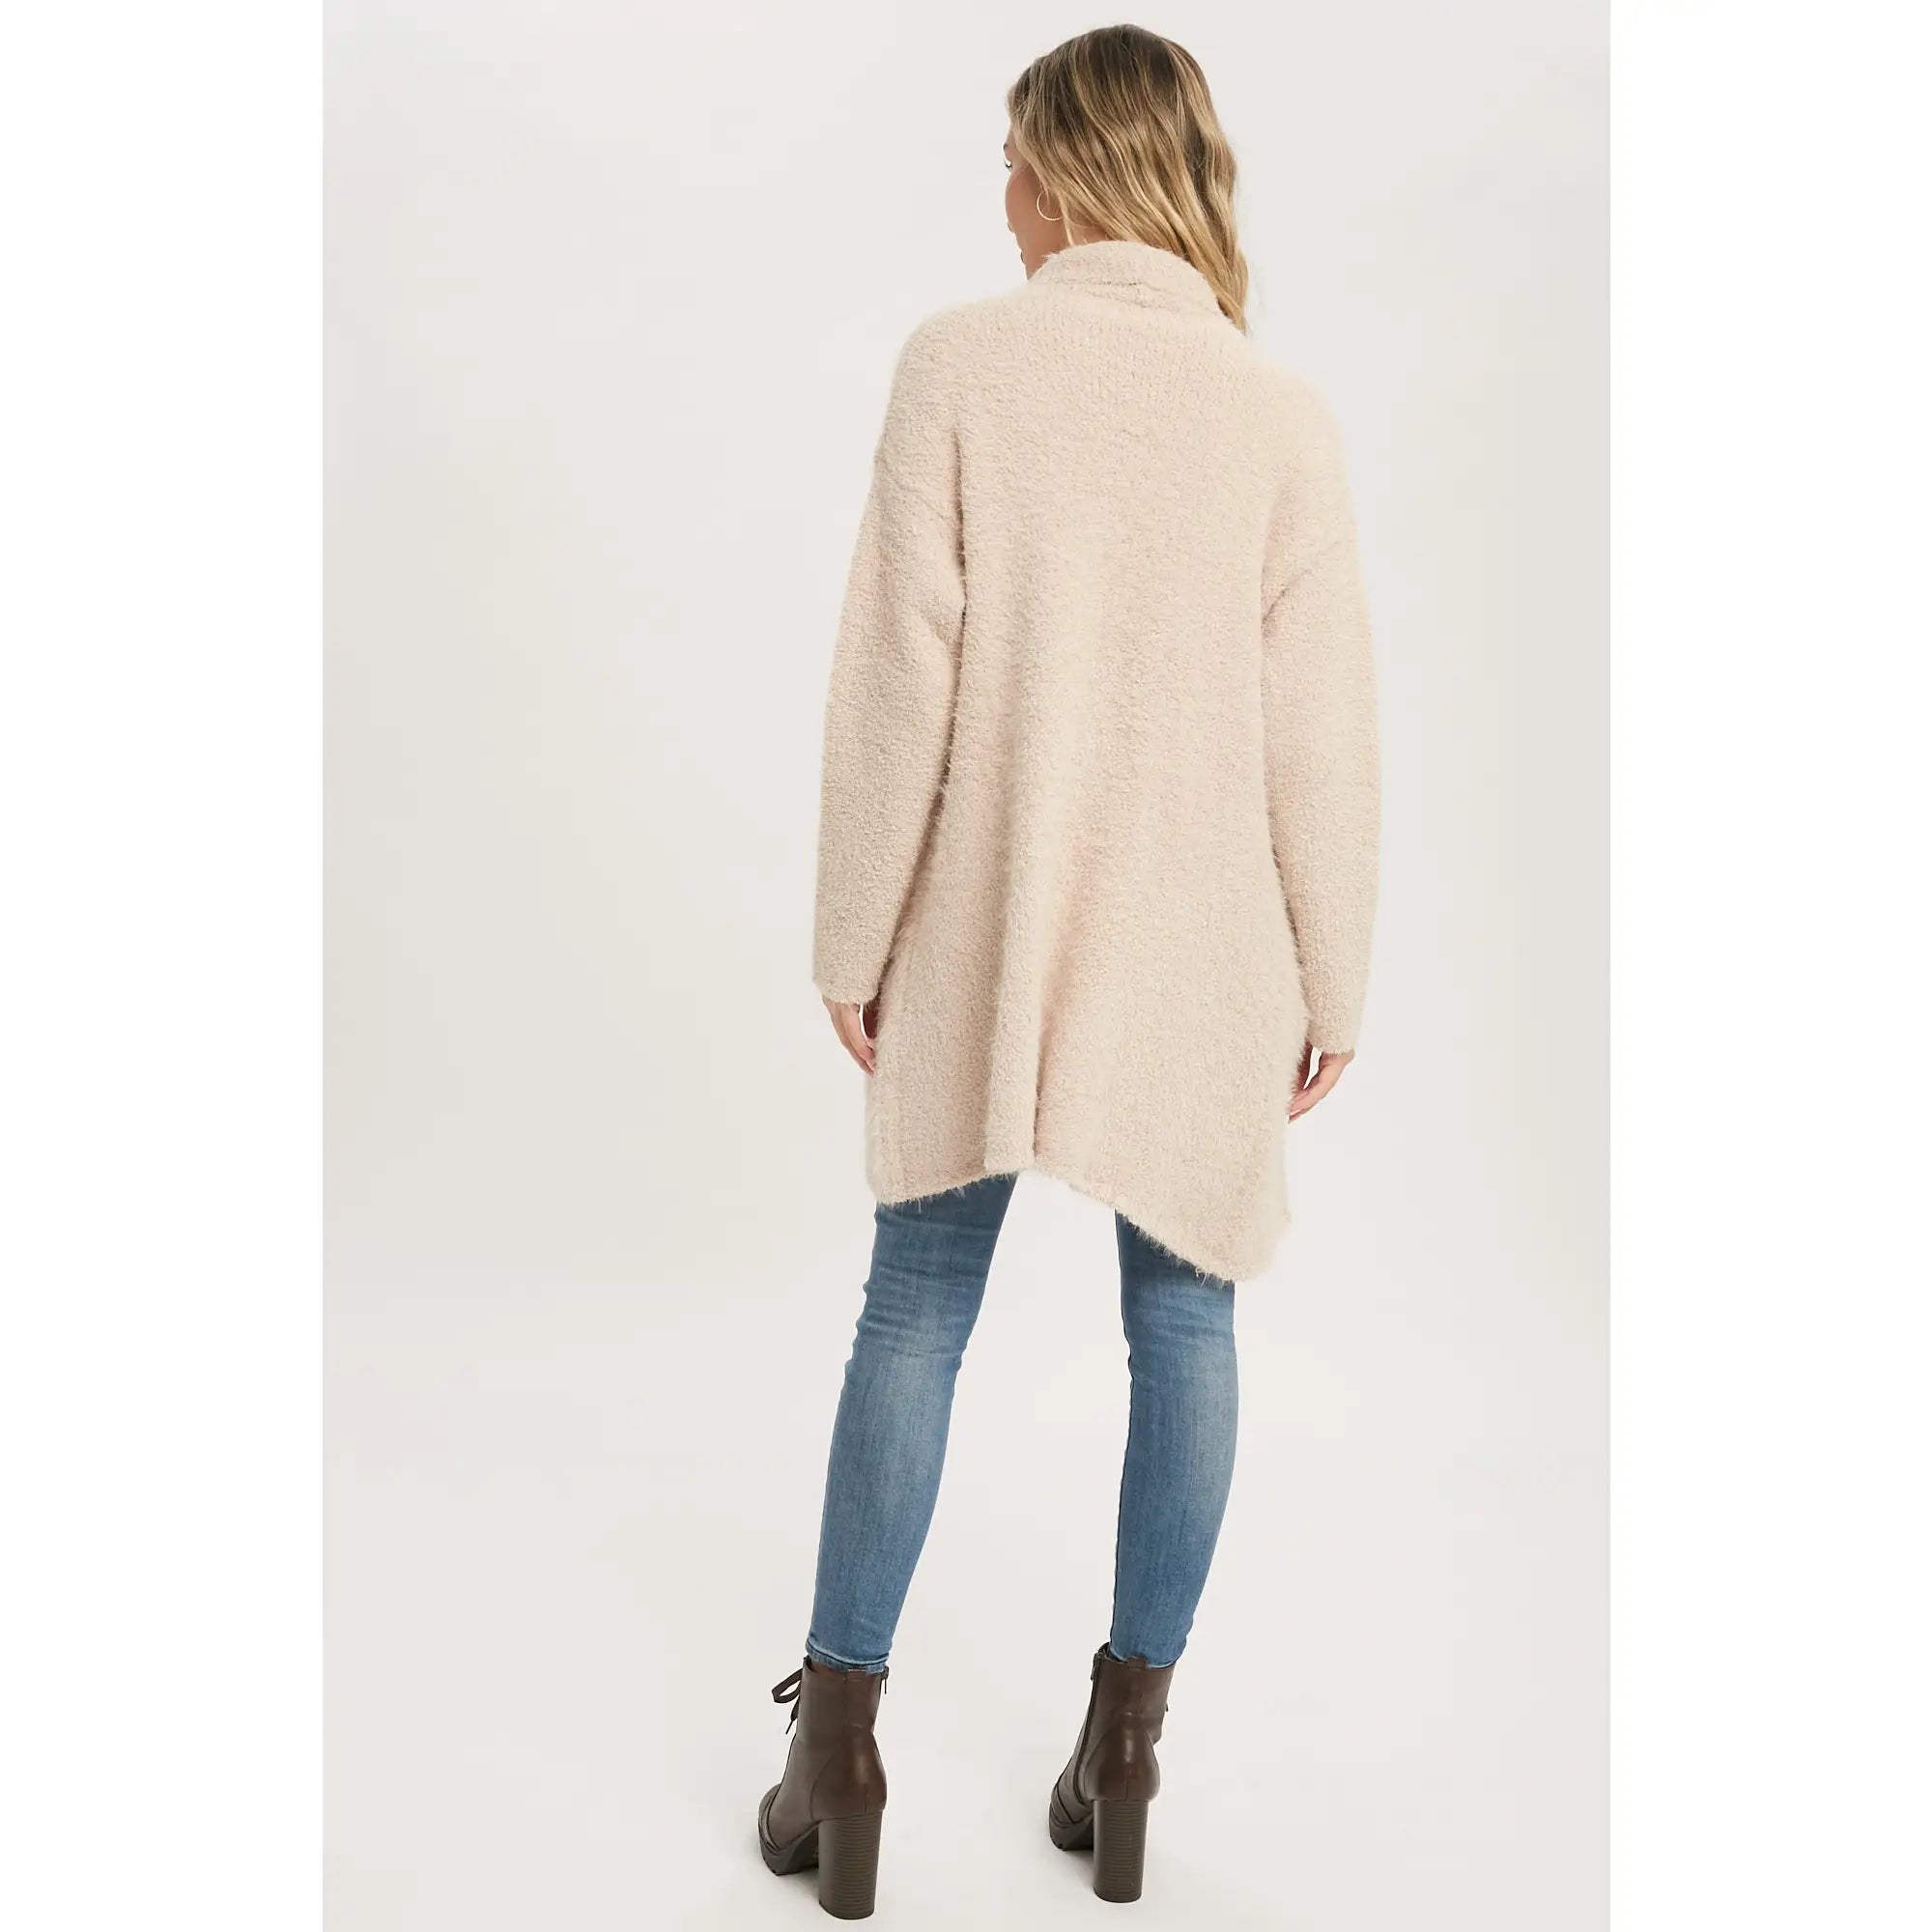 The Fuzzy Sweater Knit Cardigan – One Tooth Guelph